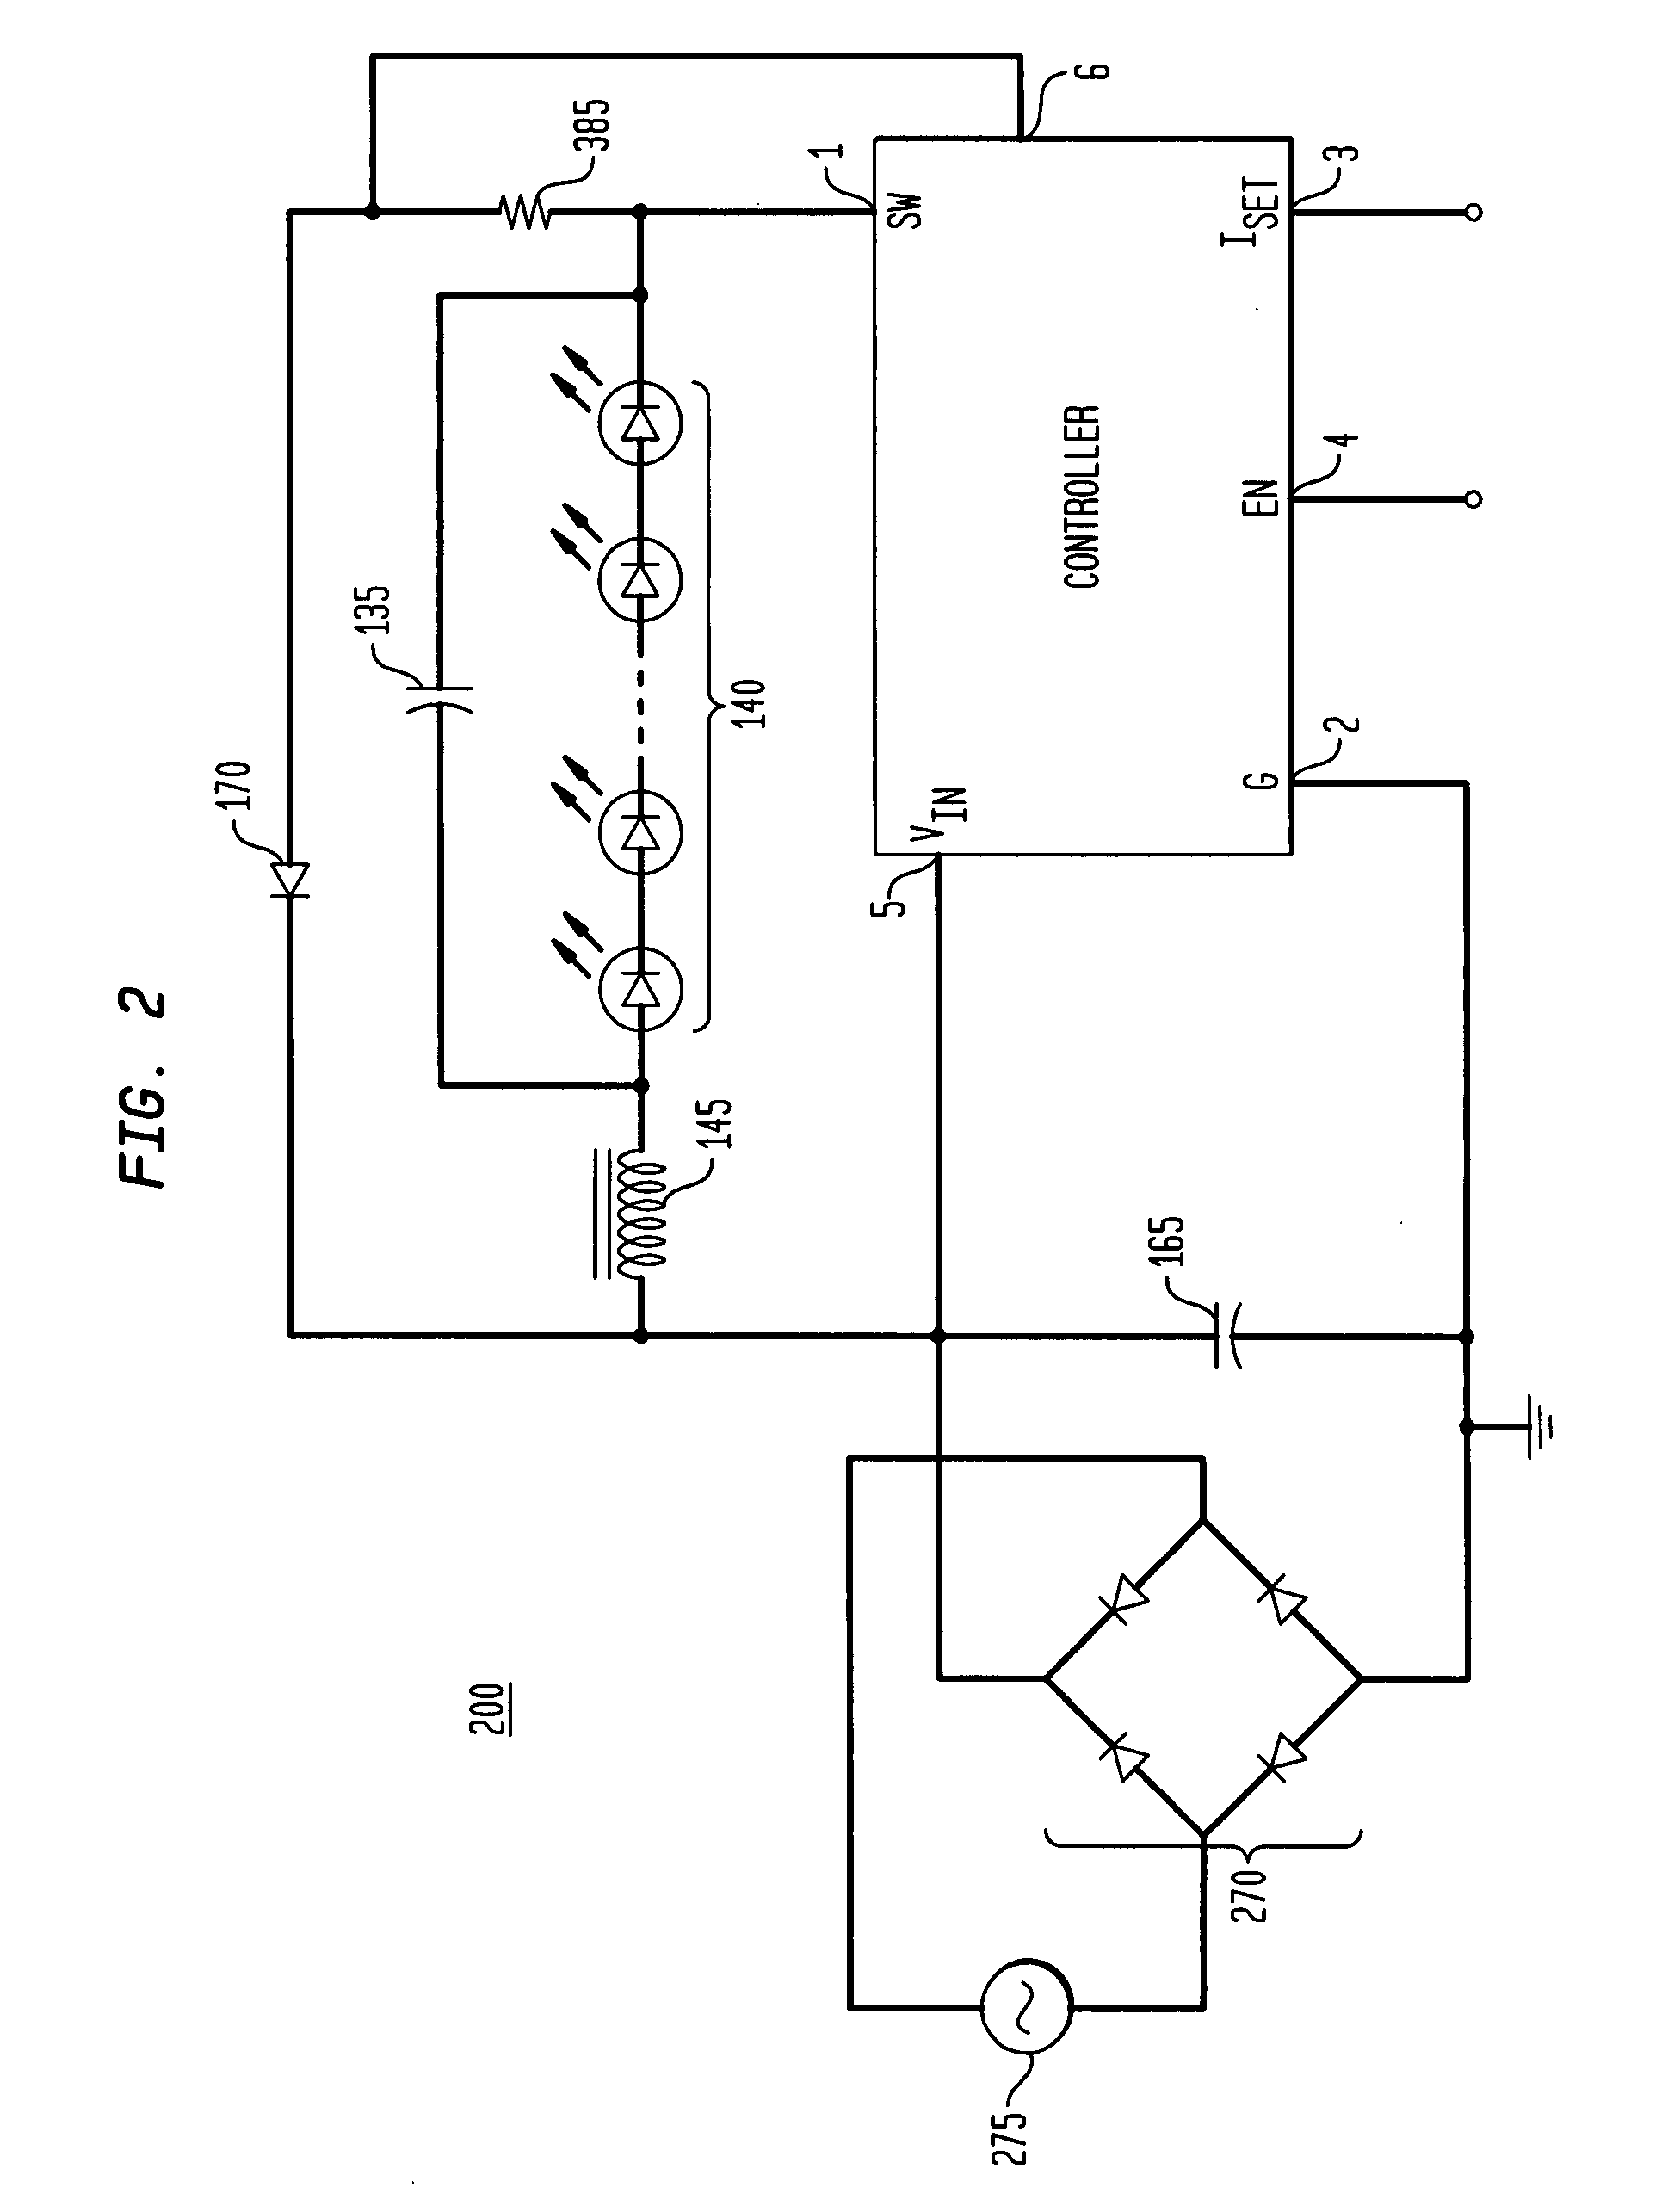 Digitally controlled current regulator for high power solid state lighting